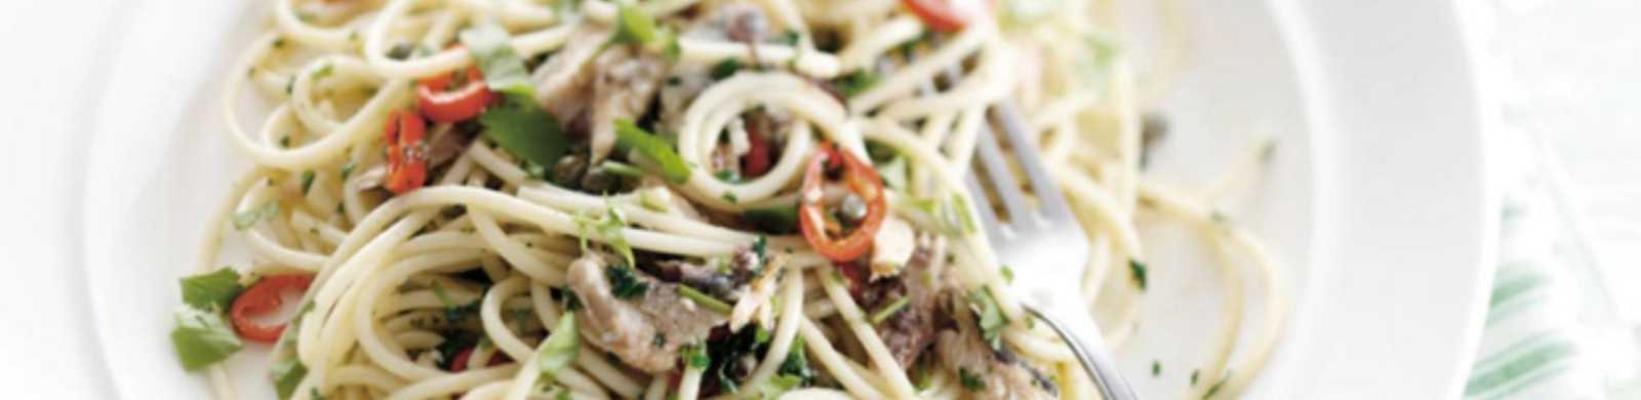 spaghetti with olive oil, sardines and capers